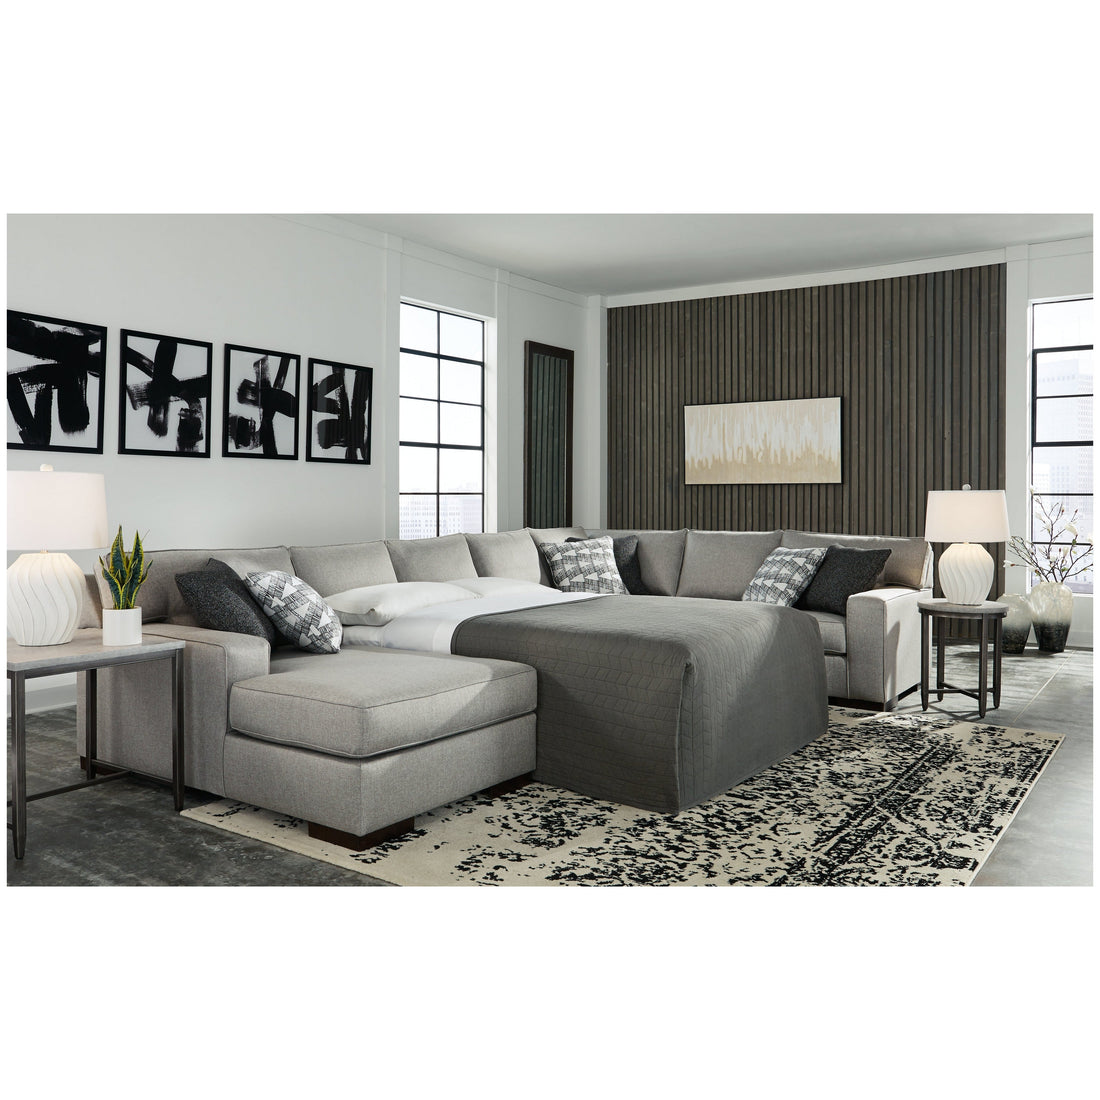 Marsing Nuvella 4-Piece Sleeper Sectional with Chaise Ash-41902S7